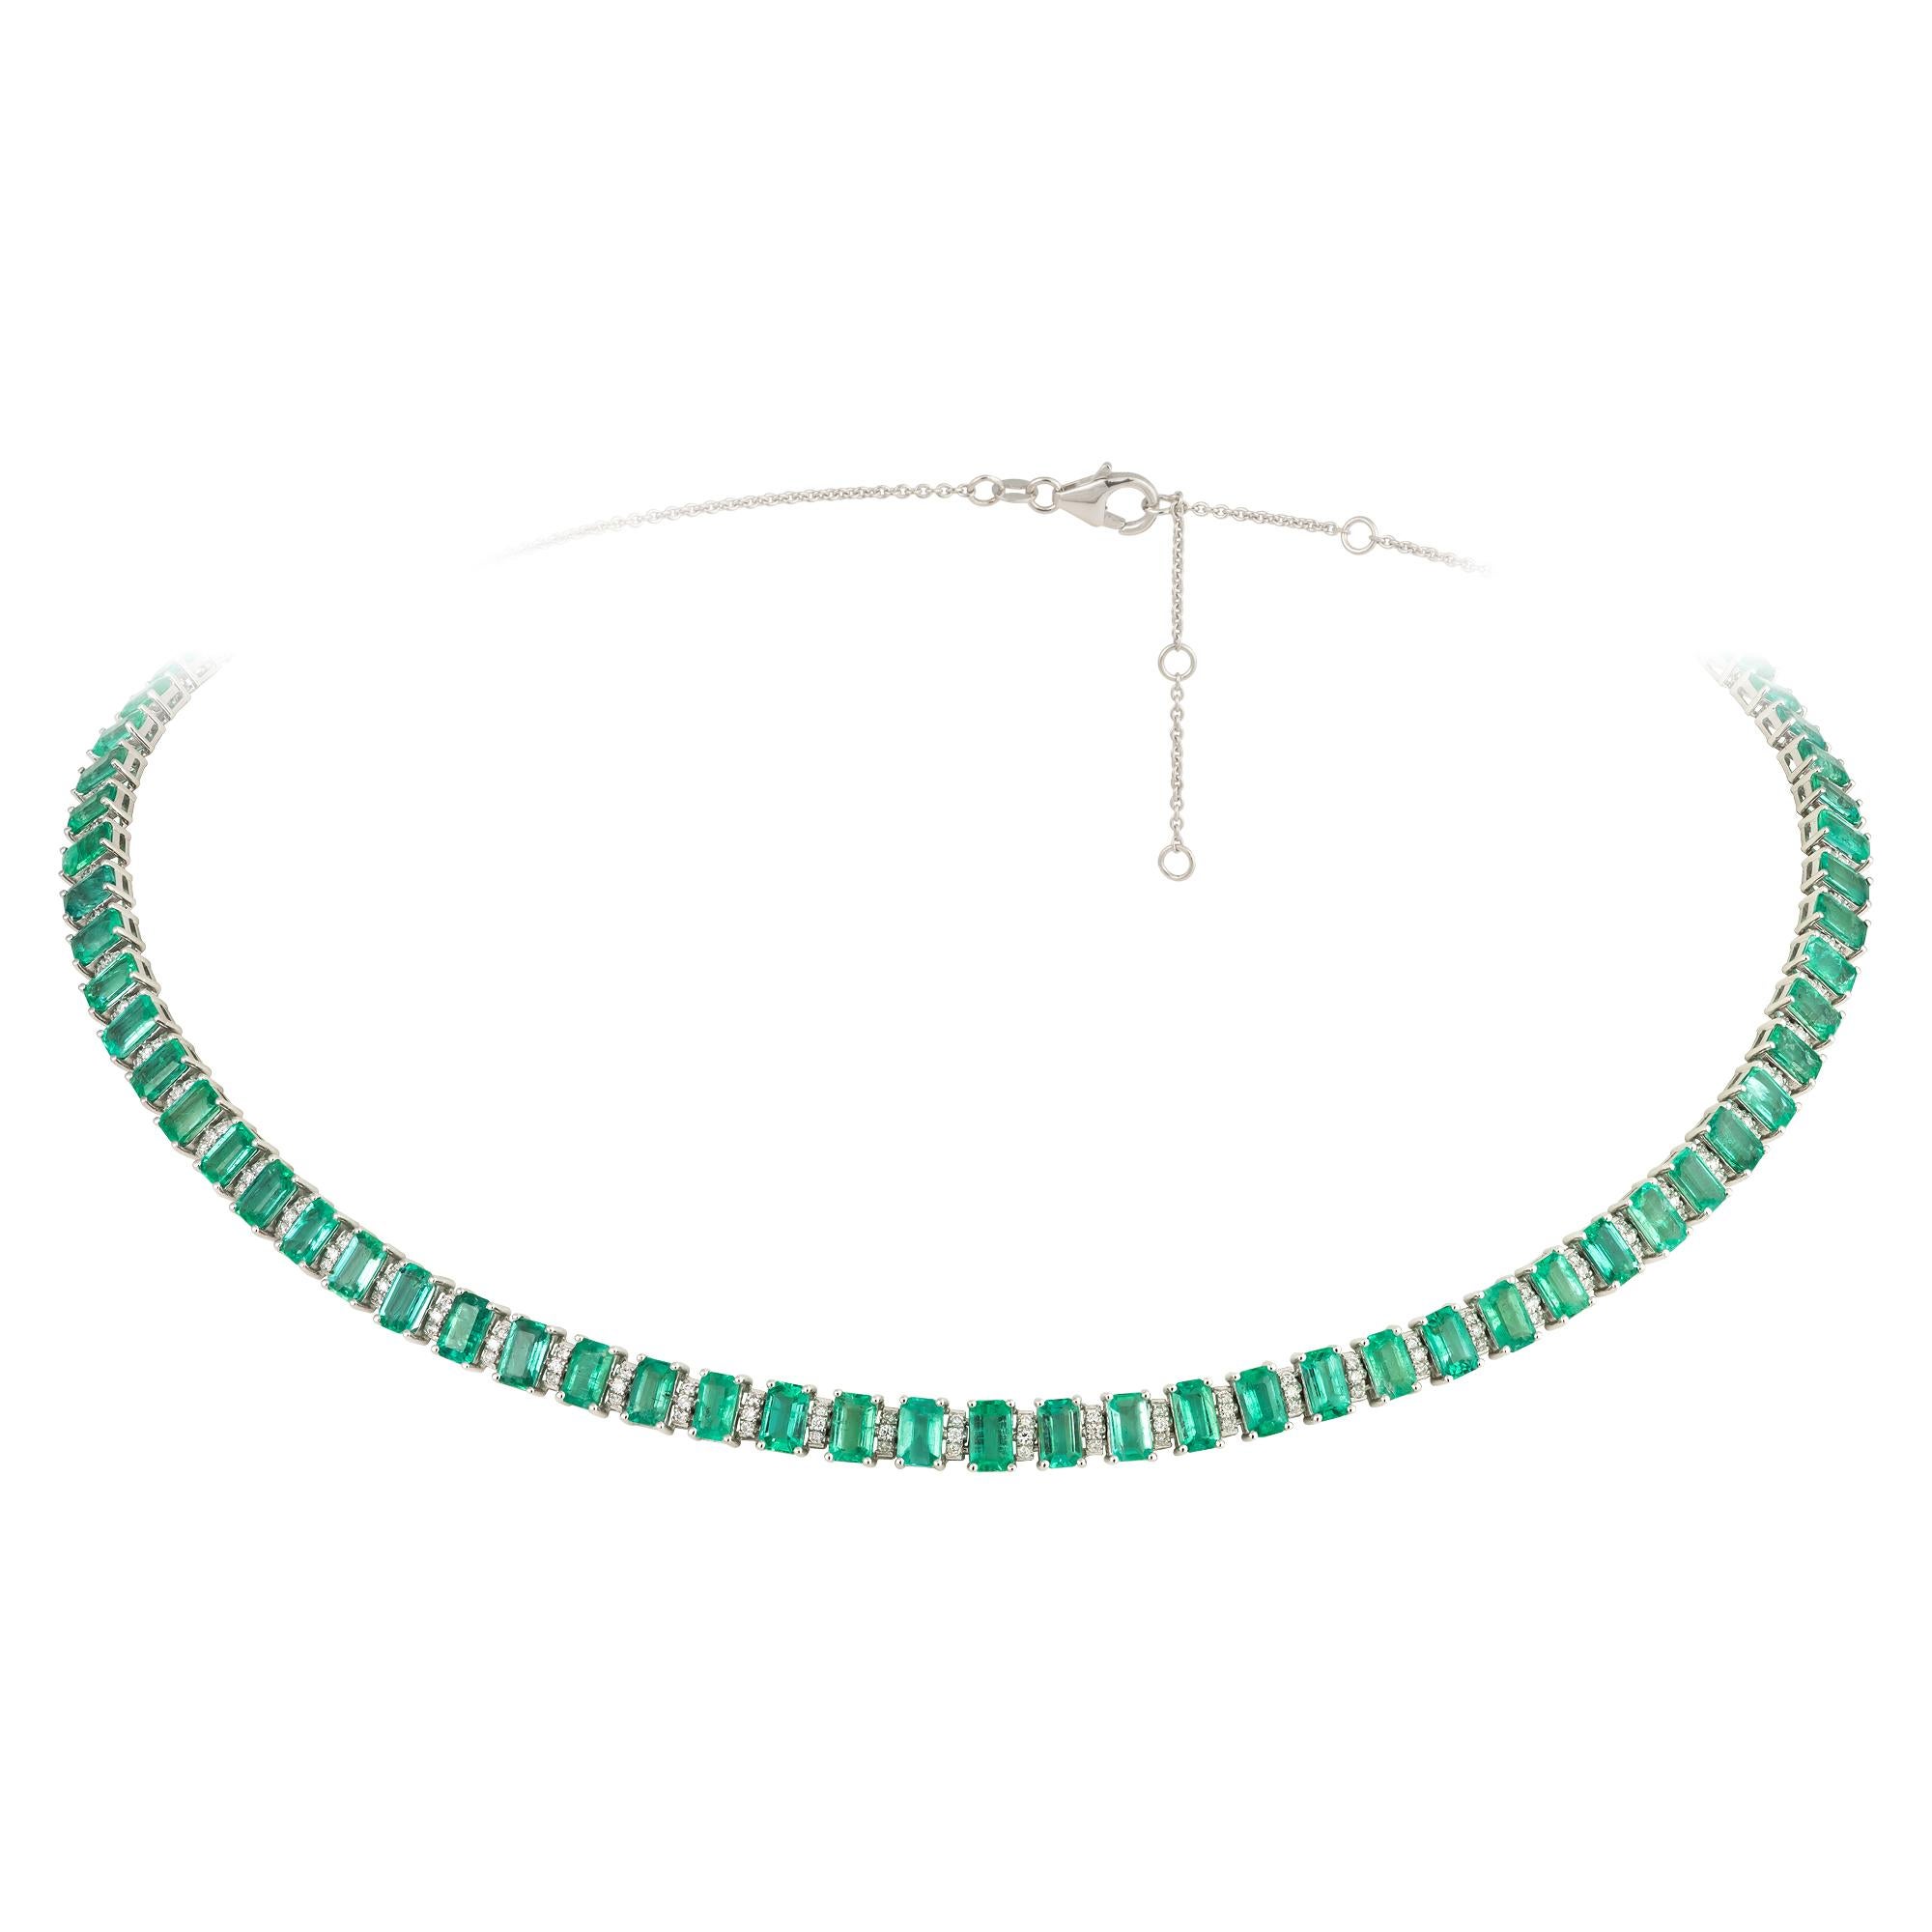 The Following Item we are offering is this Rare Important Radiant 18KT Gold Gorgeous Glittering and Sparkling Magnificent Fancy Cut Emerald and Diamond Necklace. Necklace contains approx 13.50CTS of Beautiful Fancy Emeralds and Diamonds!!! Stones